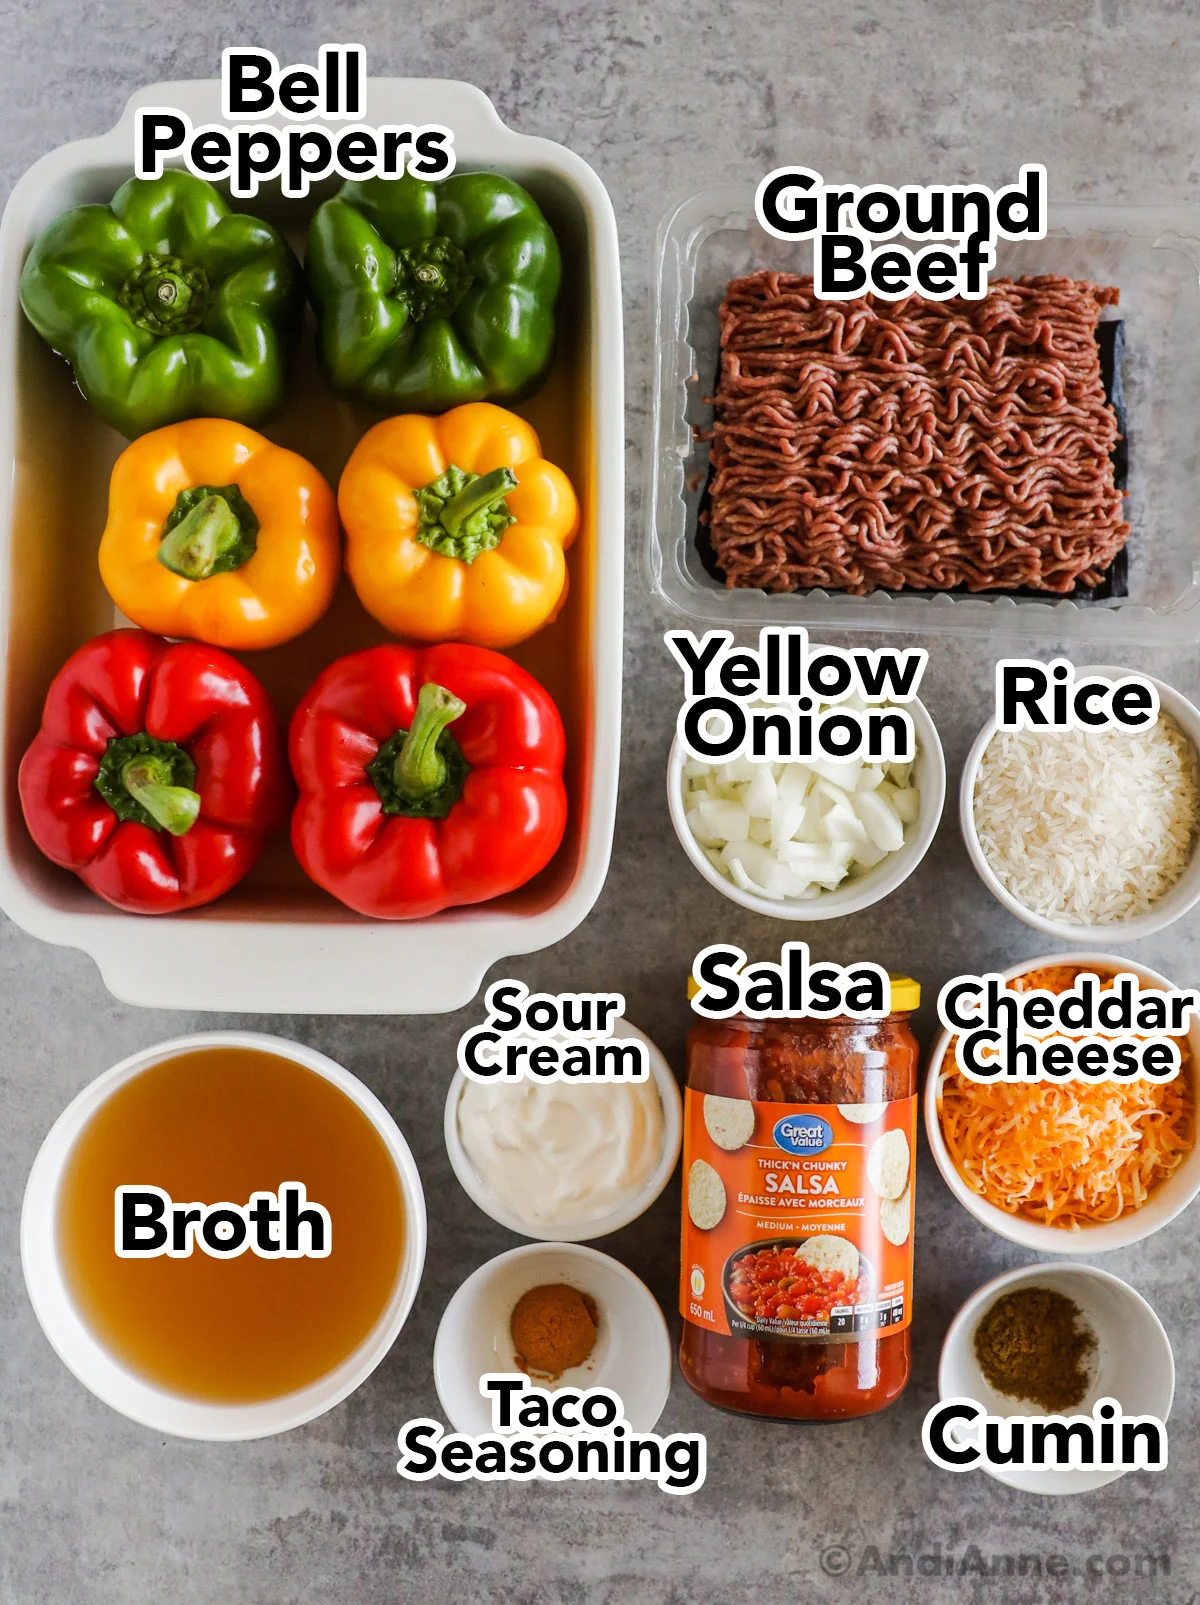 Recipe ingredients including bell peppers, broth, ground beef, chopped onion, rice, salsa, taco seasoning, cumin.